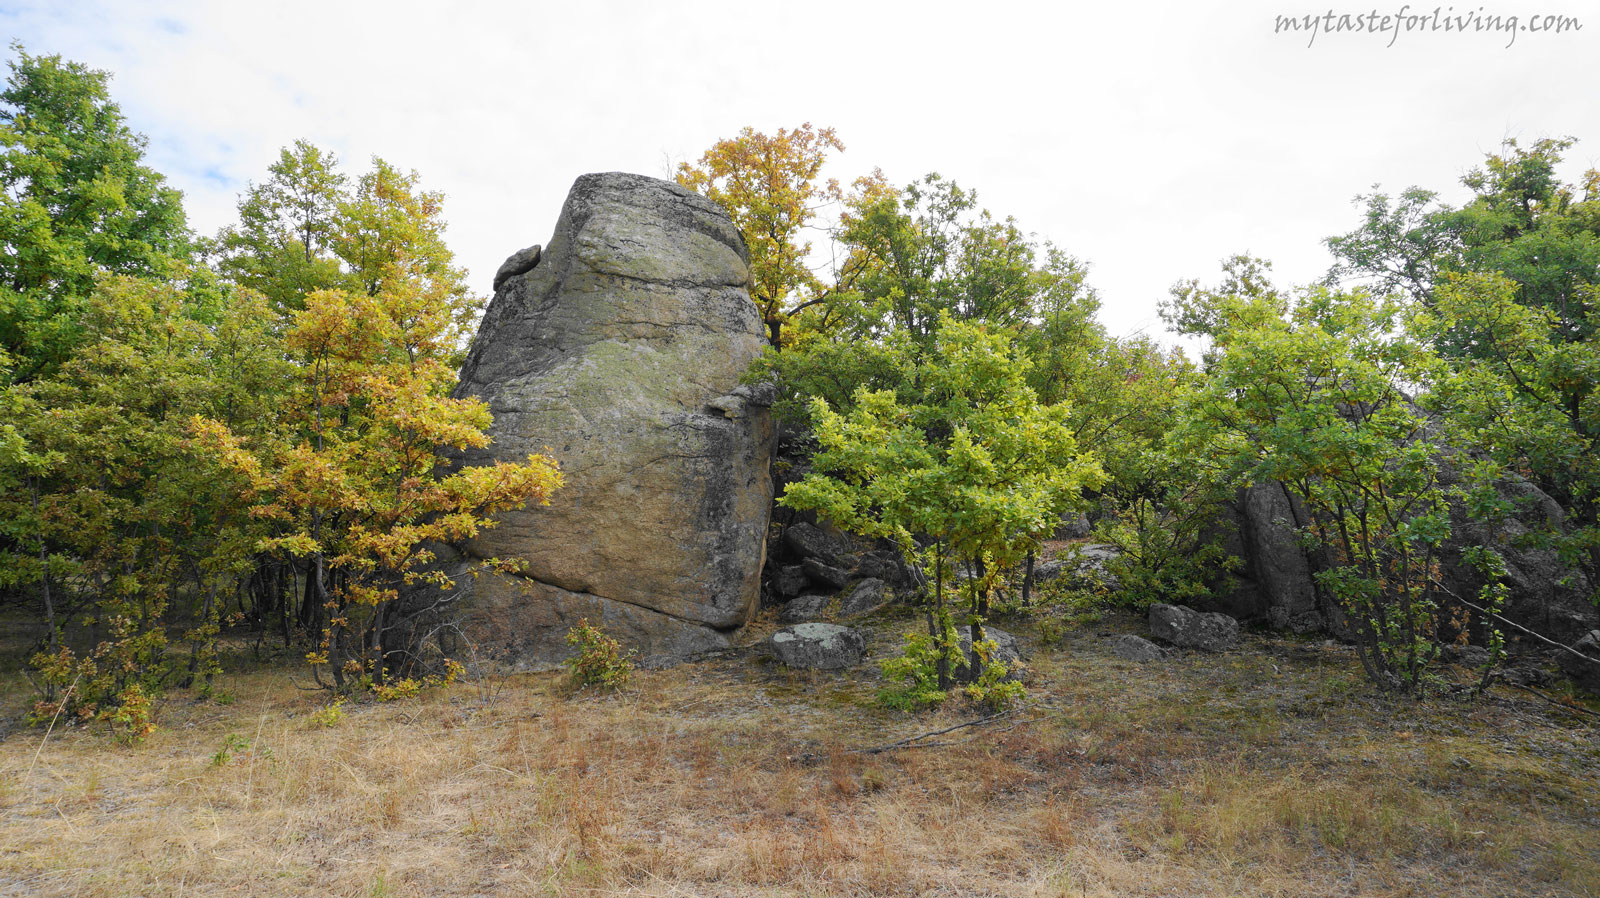 "Skumsale" locality is located 7 km from the town of Strelcha, towards the town of Koprivshtitsa, Bulgaria. It is characterized by a multitude of diverse rock formations used by ancient societies for rituals.